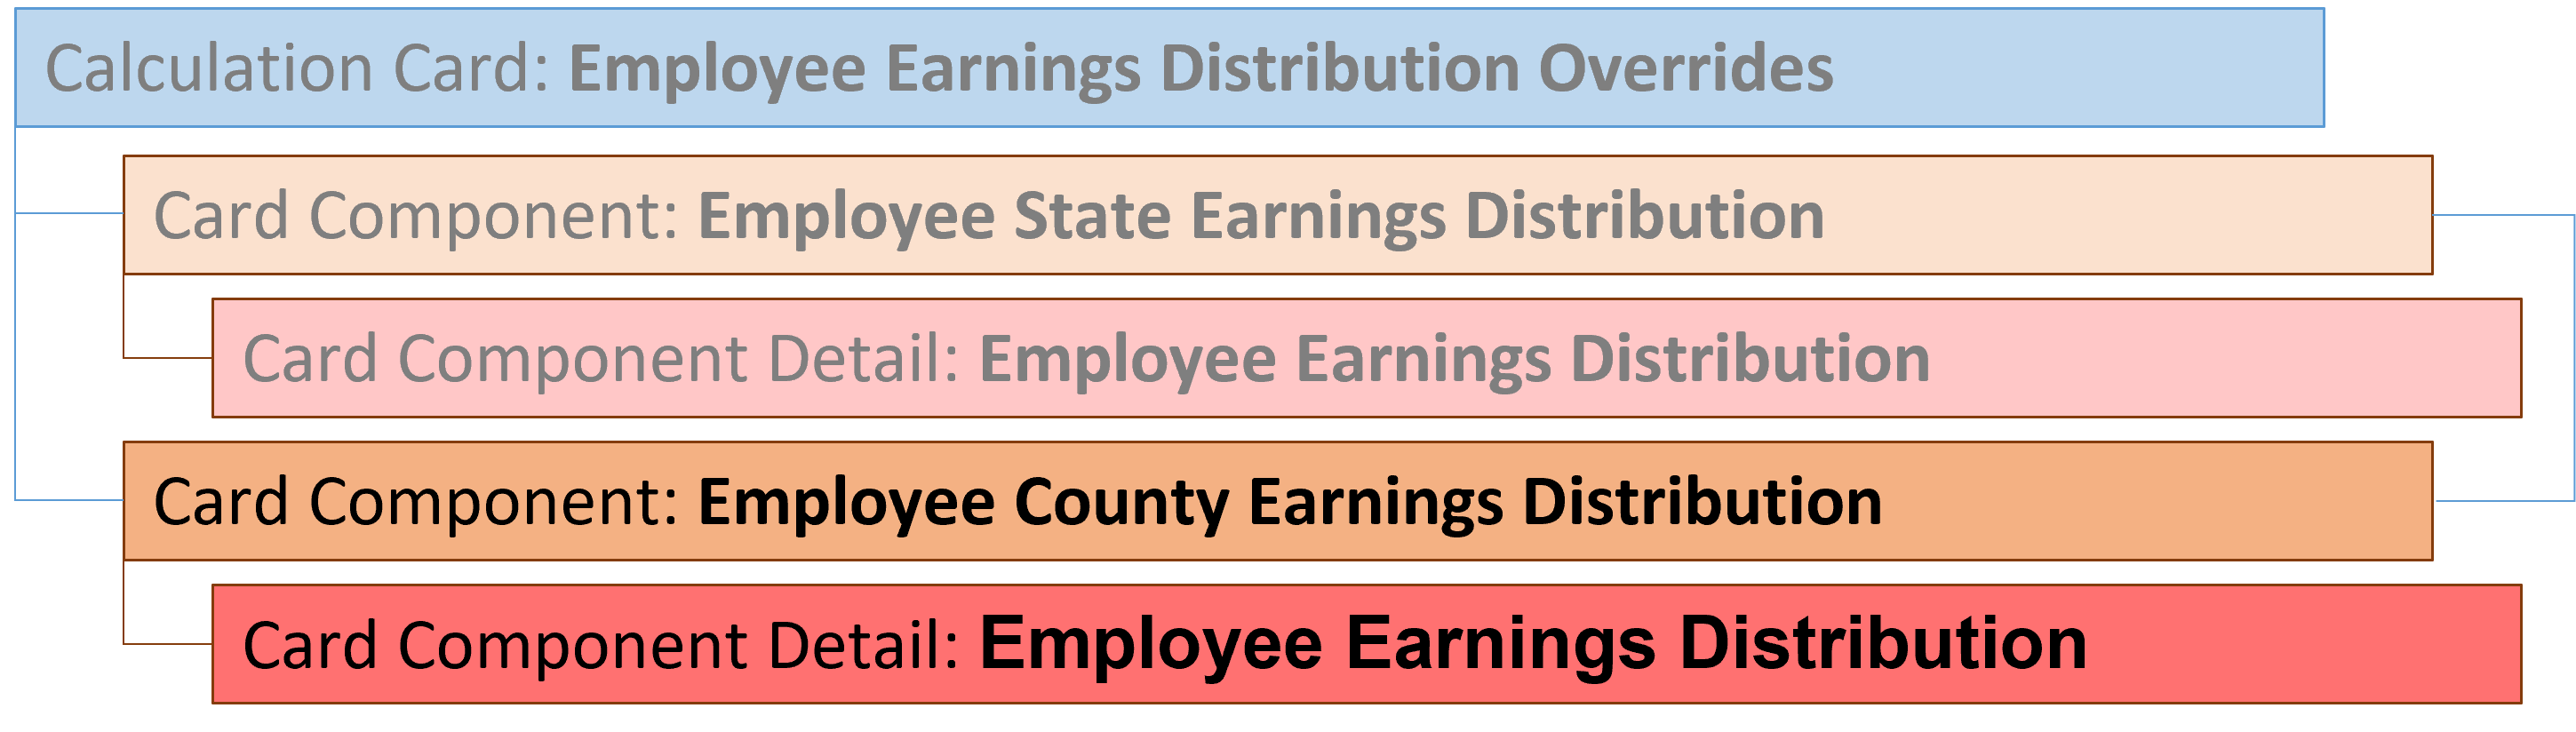 hdl employee county earnings distribution card components hierarchy